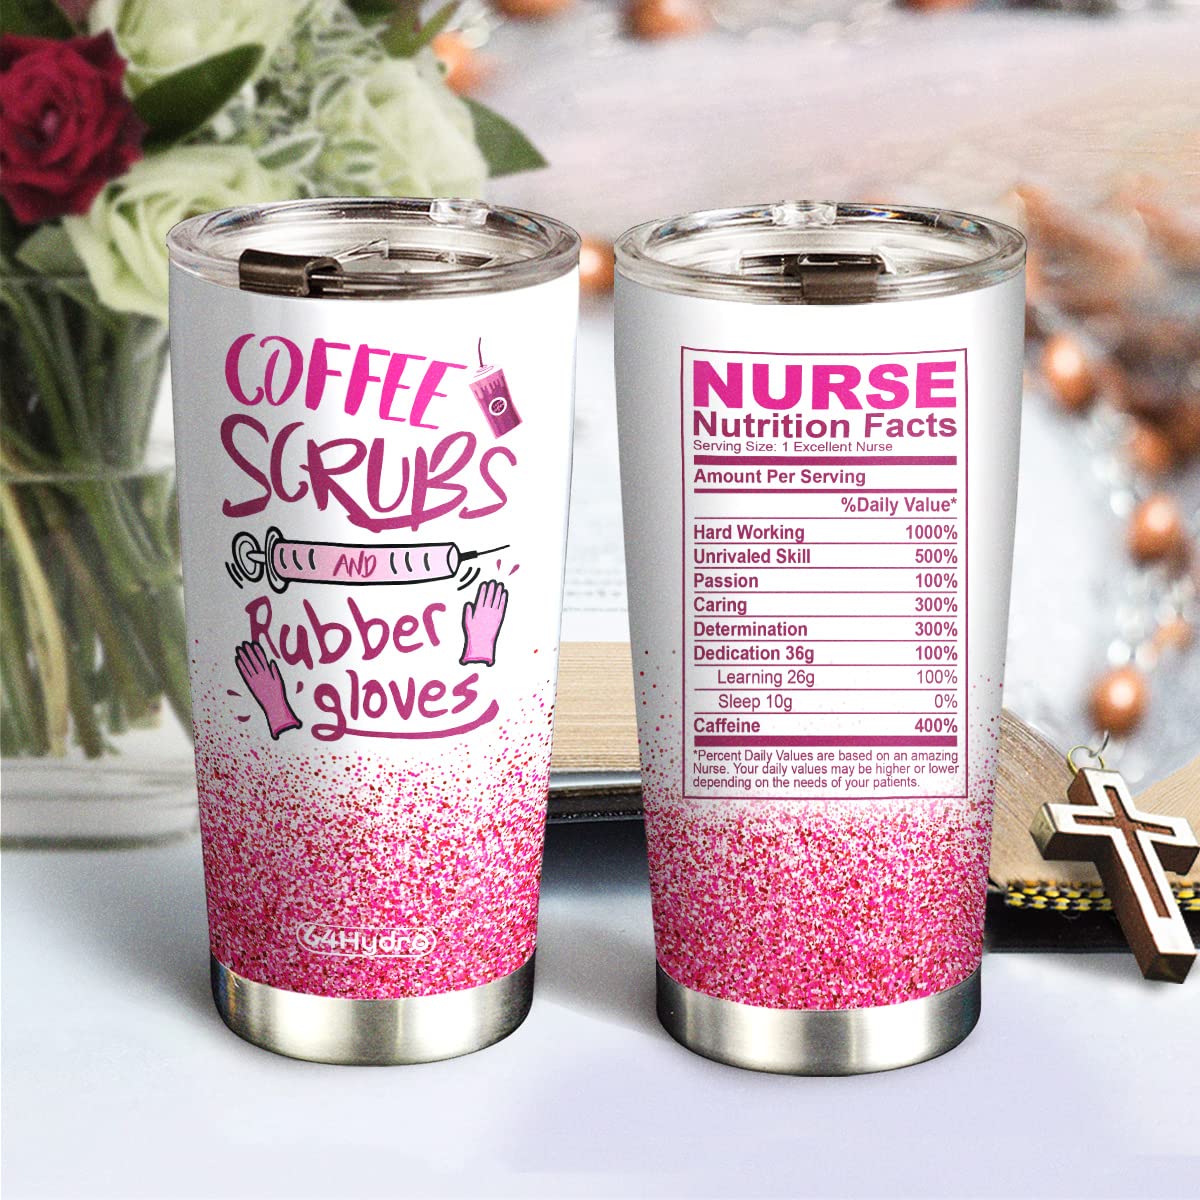 64HYDRO 20oz Coffee Scrubs and Rubber Gloves Nurse Nutrition Facts Inspiration Motivation Tumbler Cup with Lid, Double Wall Vacuum Sporty Thermos Insulated Travel Coffee Mug - THA0503002Z